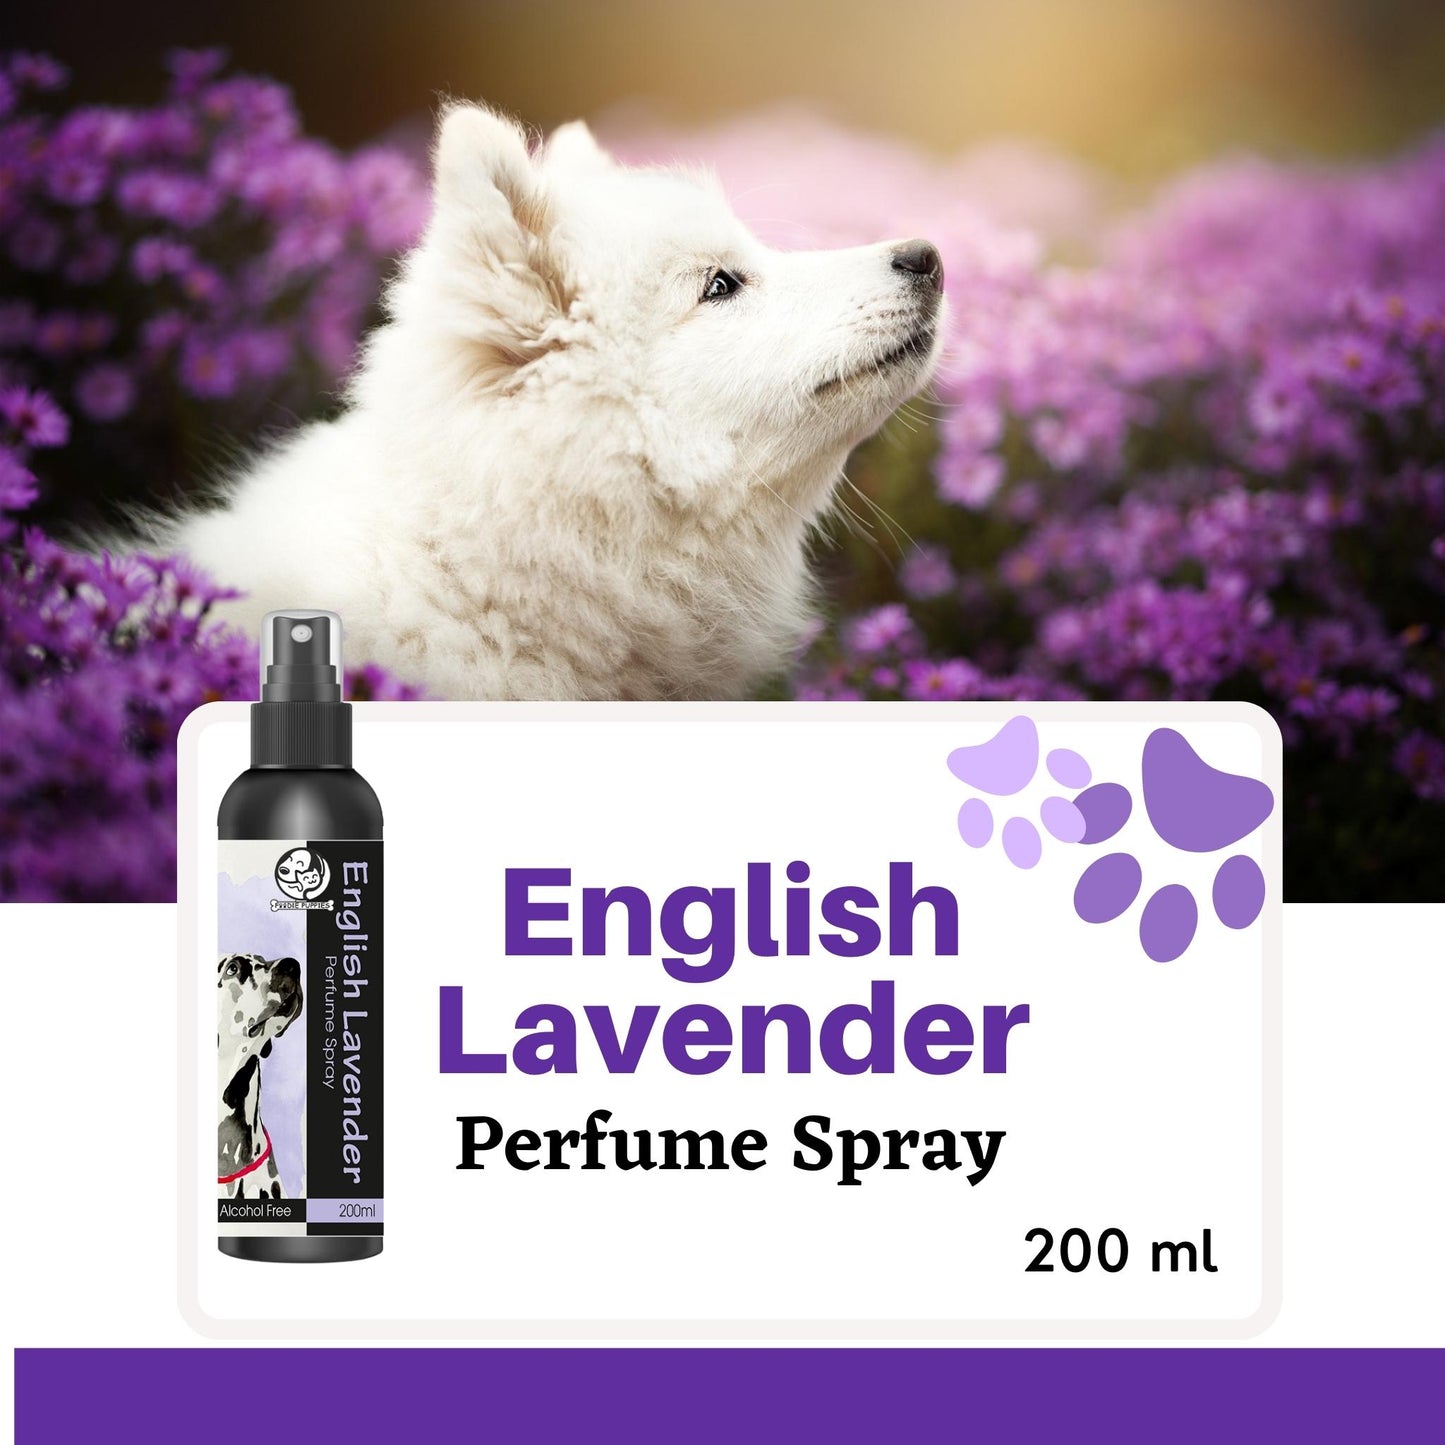 Foodie Puppies Pet Perfume Spray English Lavender for Dogs - 200 ml